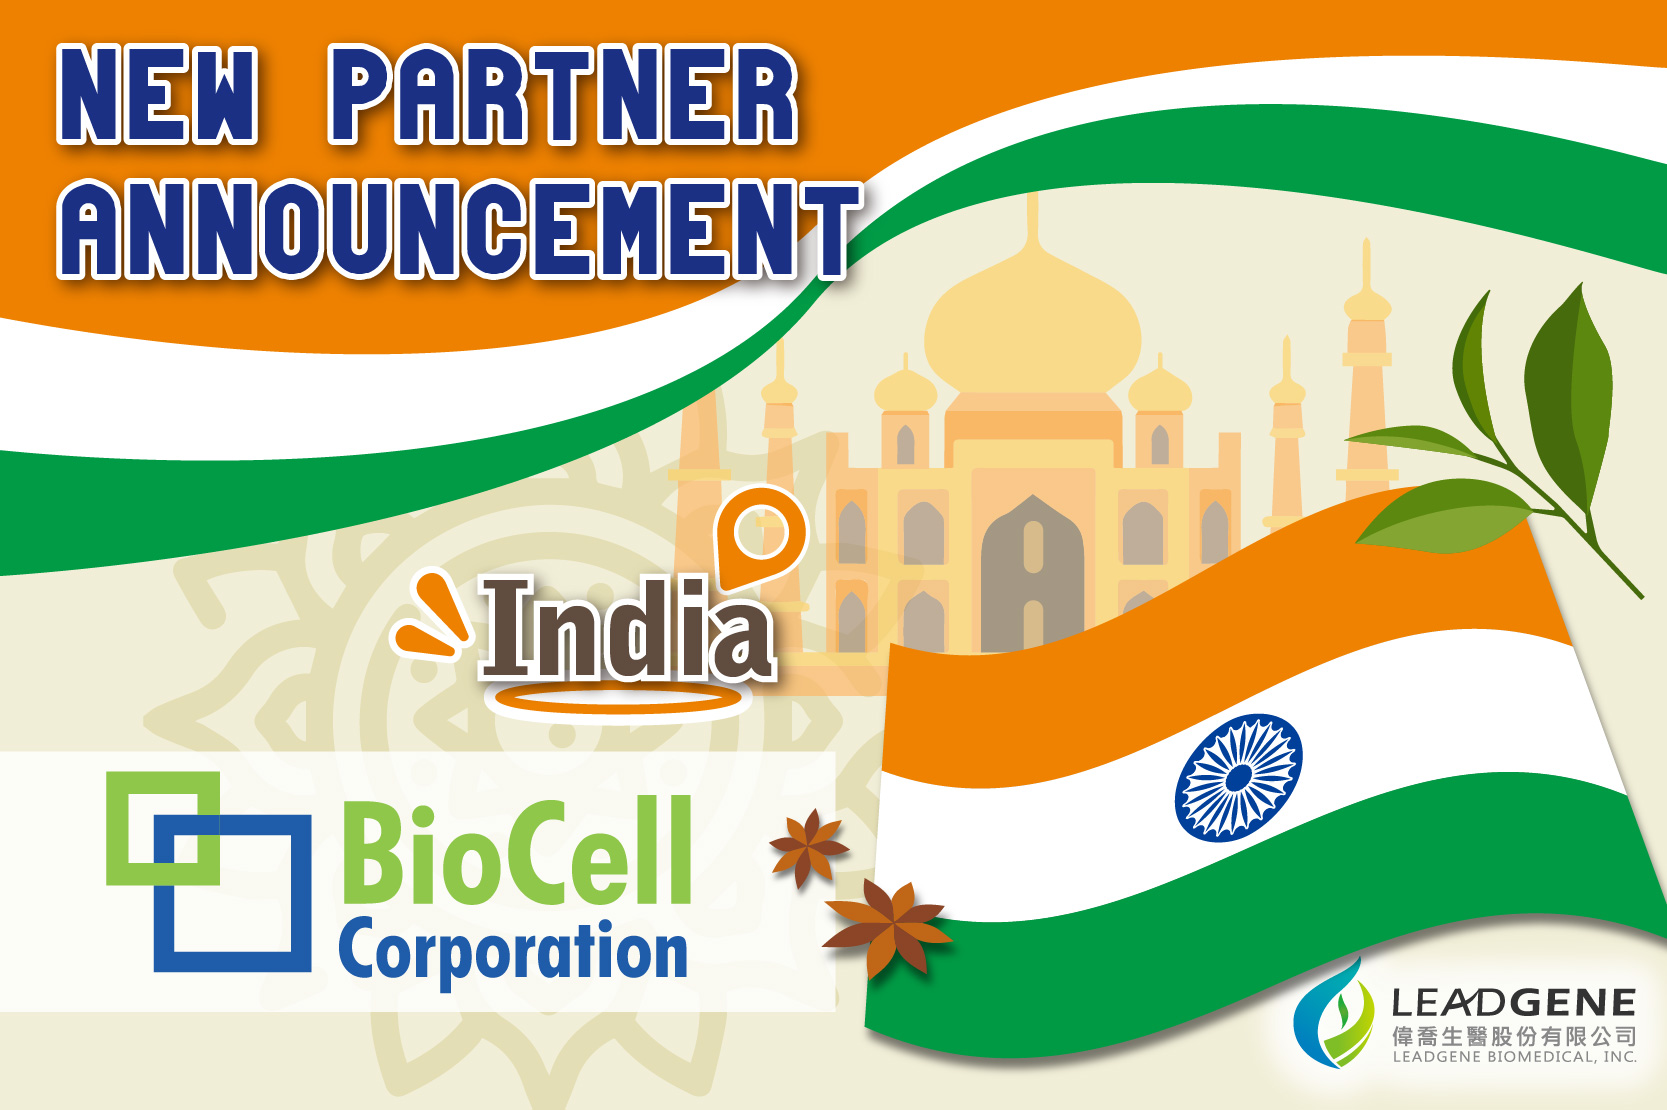 New Distributor Announcement - BioCell